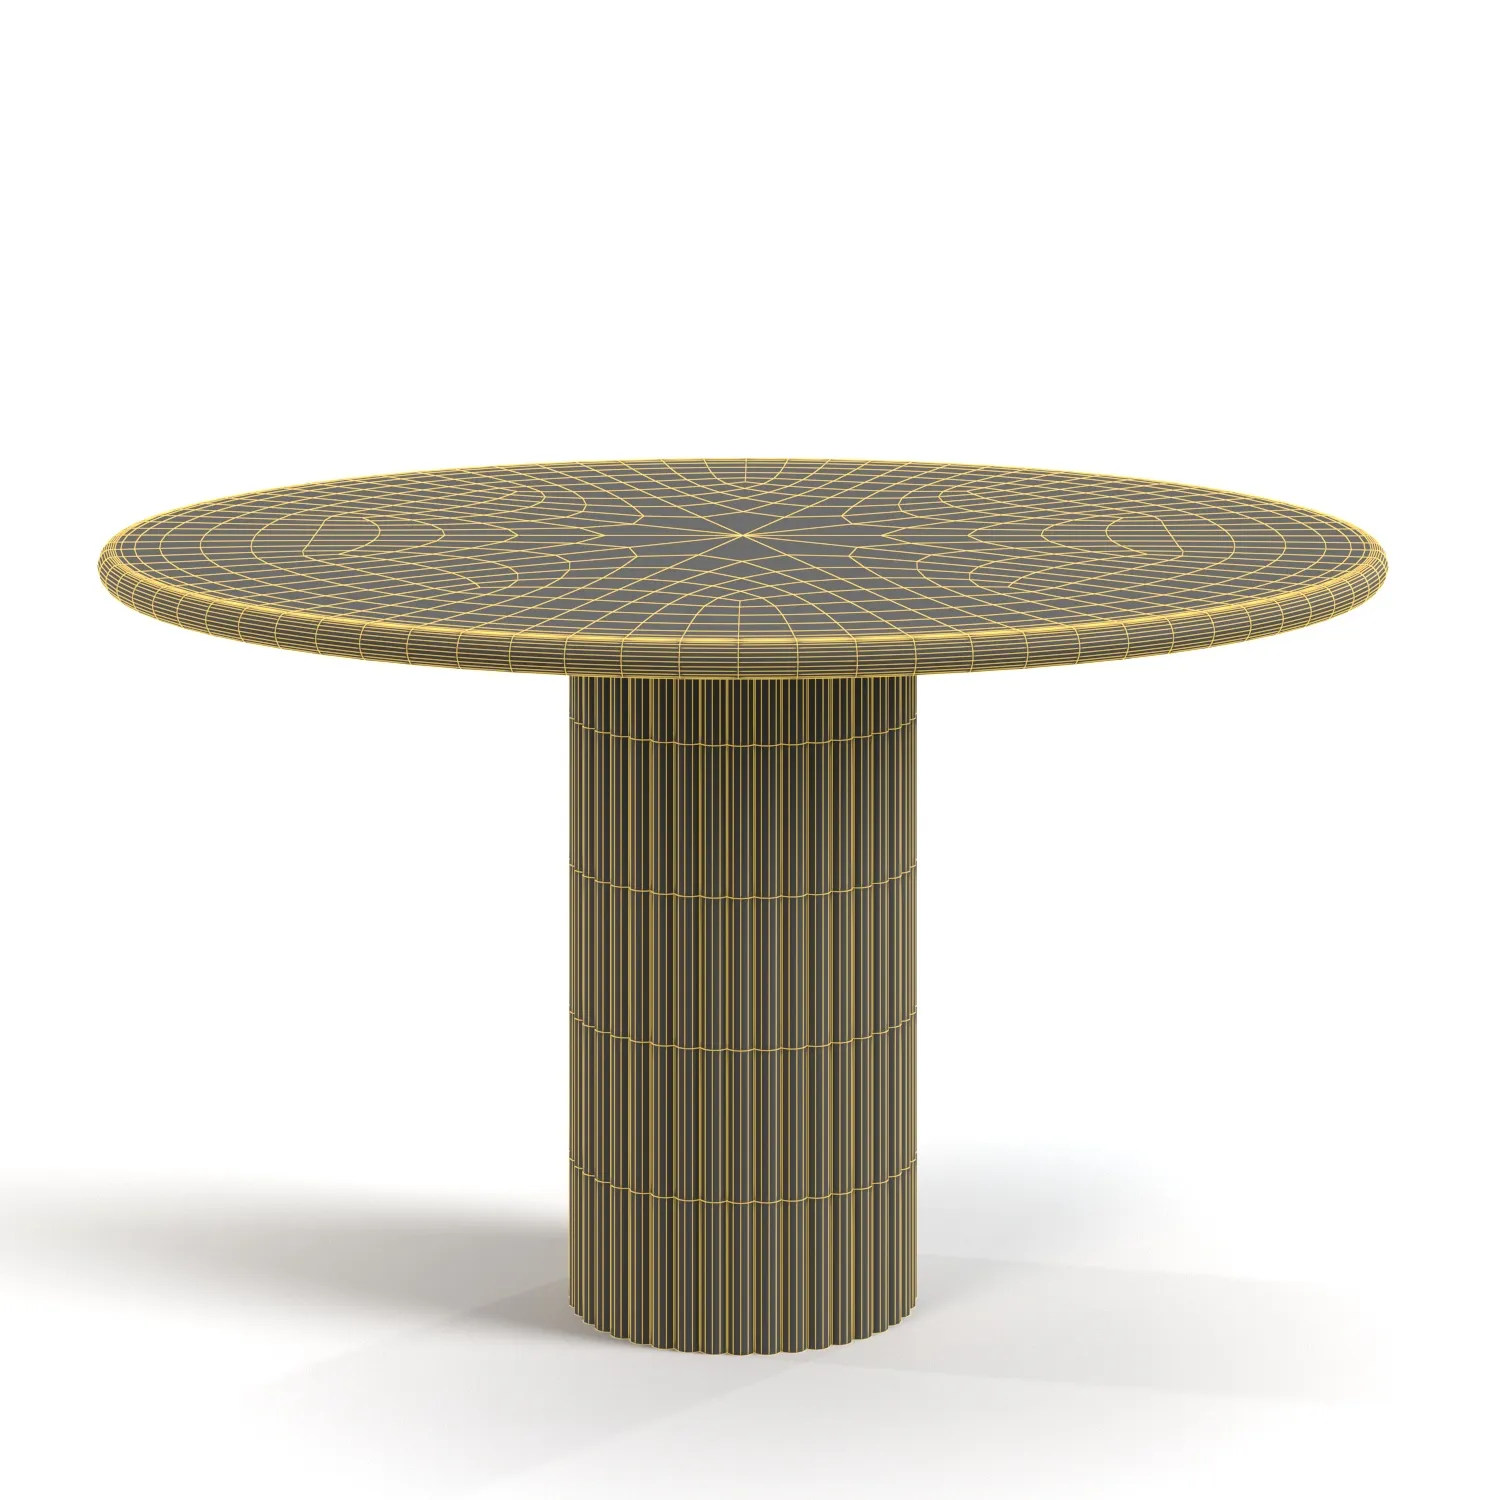 Cava Fluted Round Beige Travertine Dining Table 3D Model_07